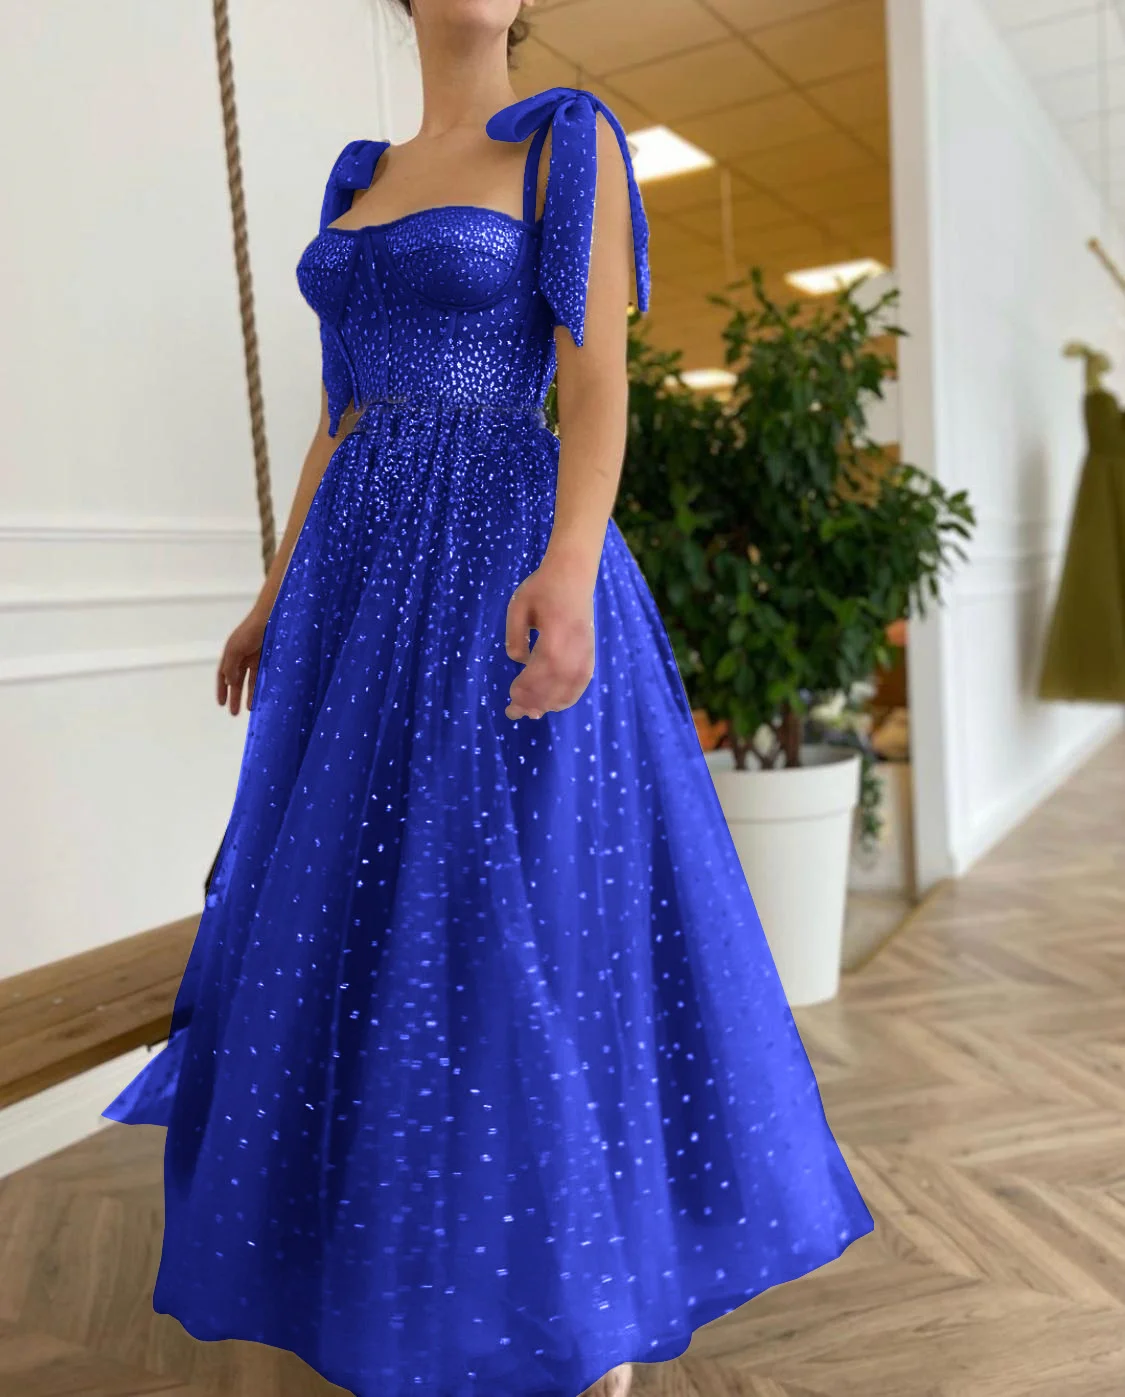 Dress Sequin Sparkly Gold Bow Straps Long Banquet Evening Party Club Night Vestidos Tulle Skirts Maxi Dresses For Women's